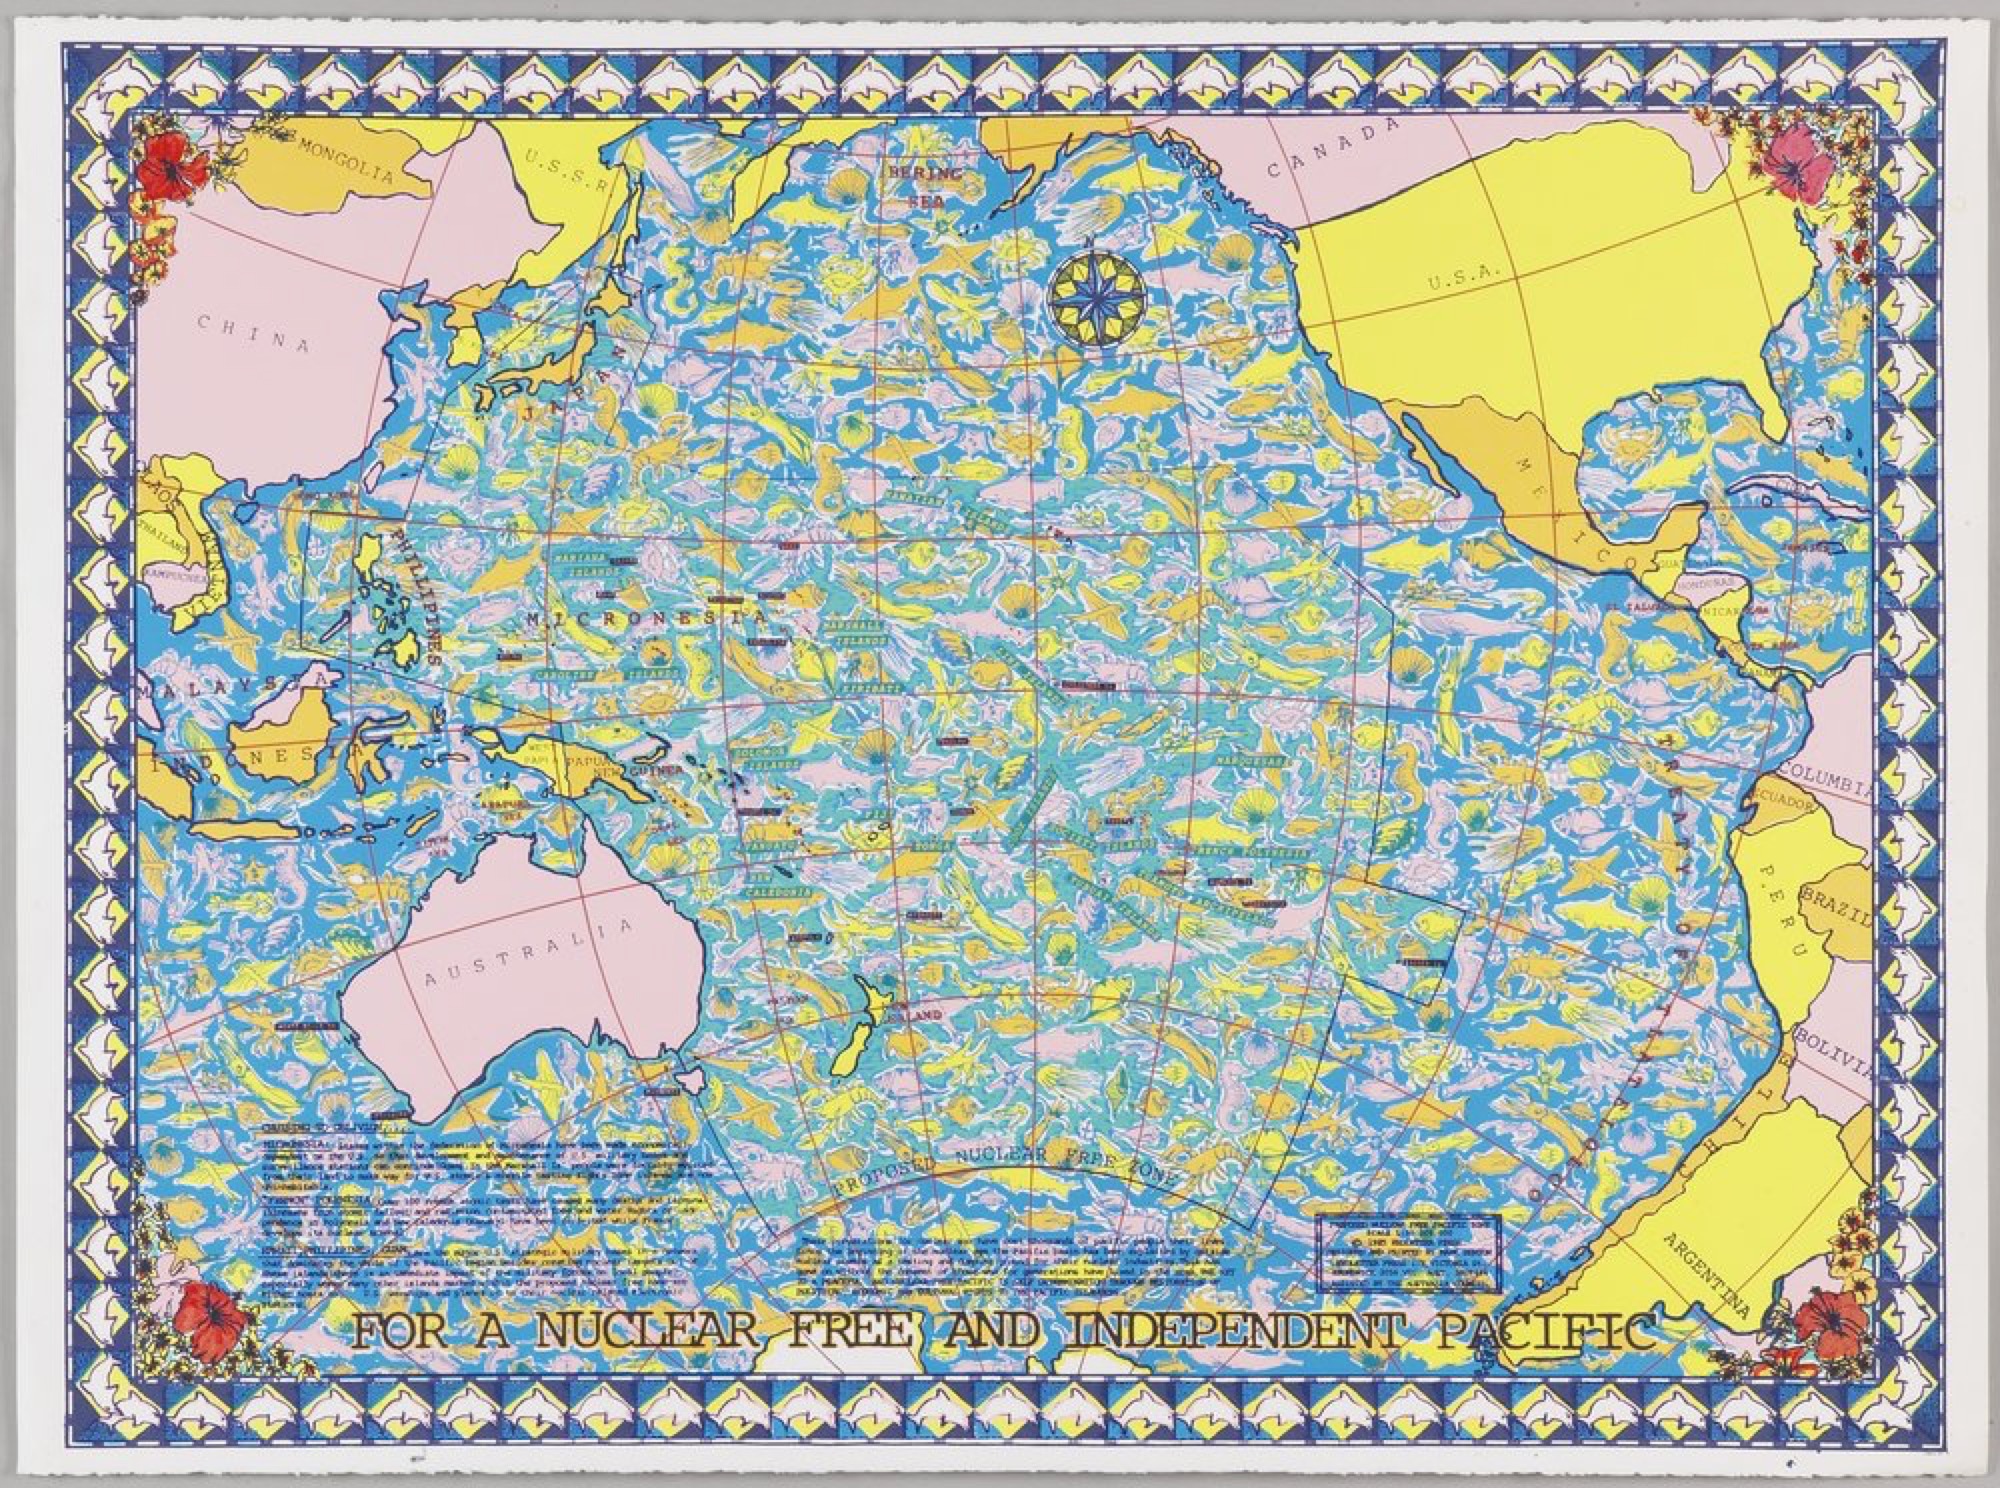 Mark Denton<br />
<em>For a nuclear free and independent Pacific</em>, 1985 colour screenprint.<br />
Courtesy of the State Library of Victoria